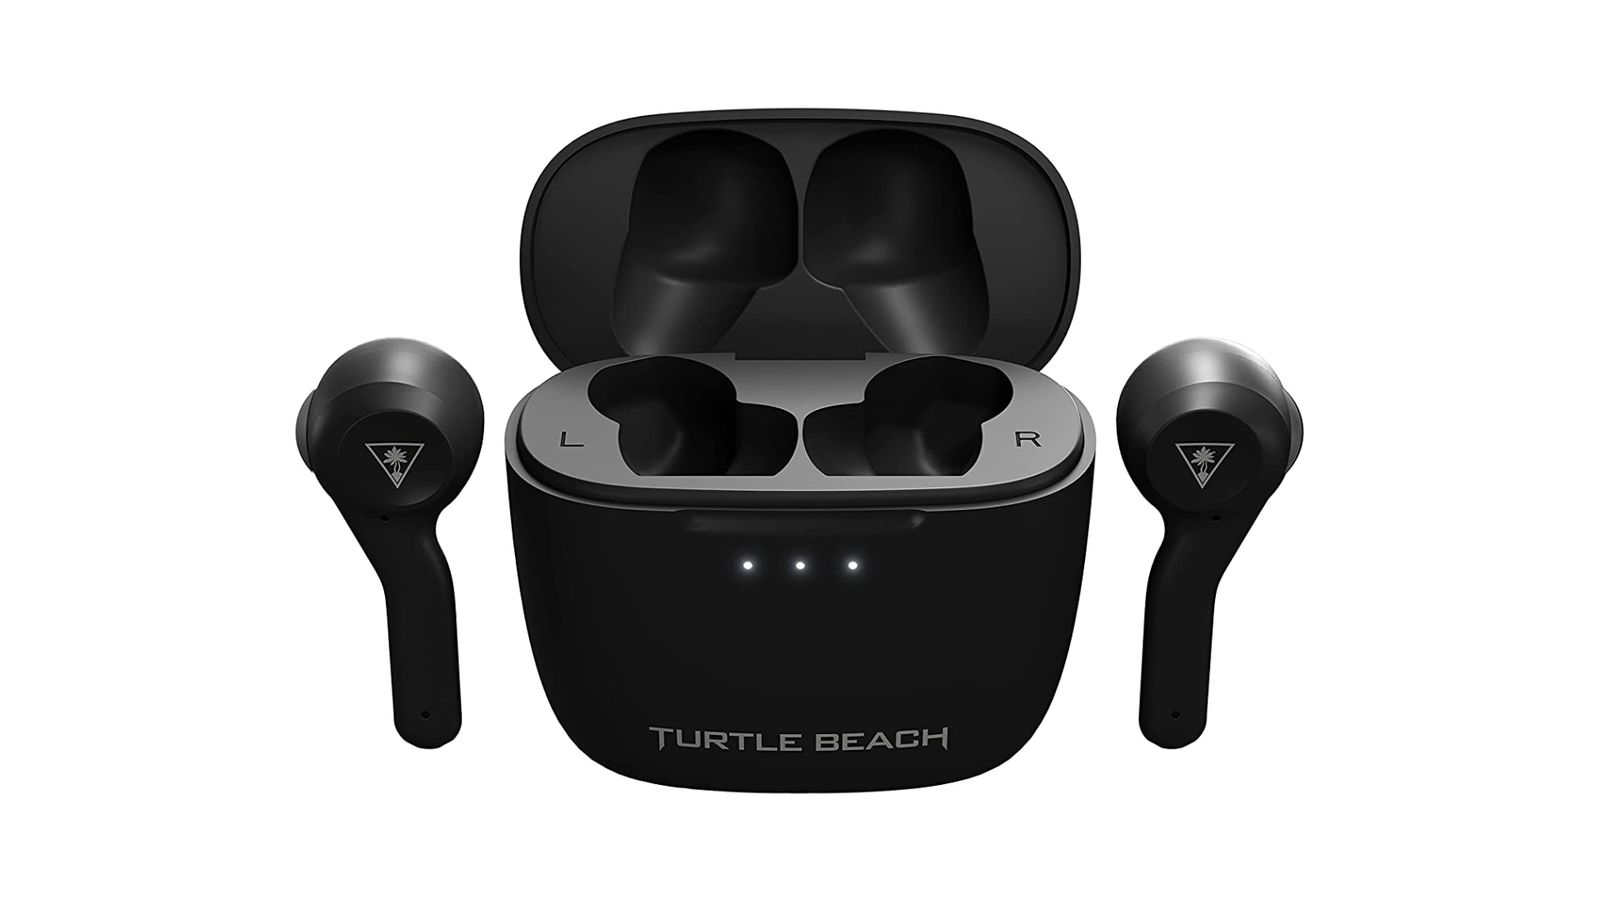 Best gaming earbuds - Turtle Beach Scout Air product image of two black wireless earbuds next to a rounded charging case.